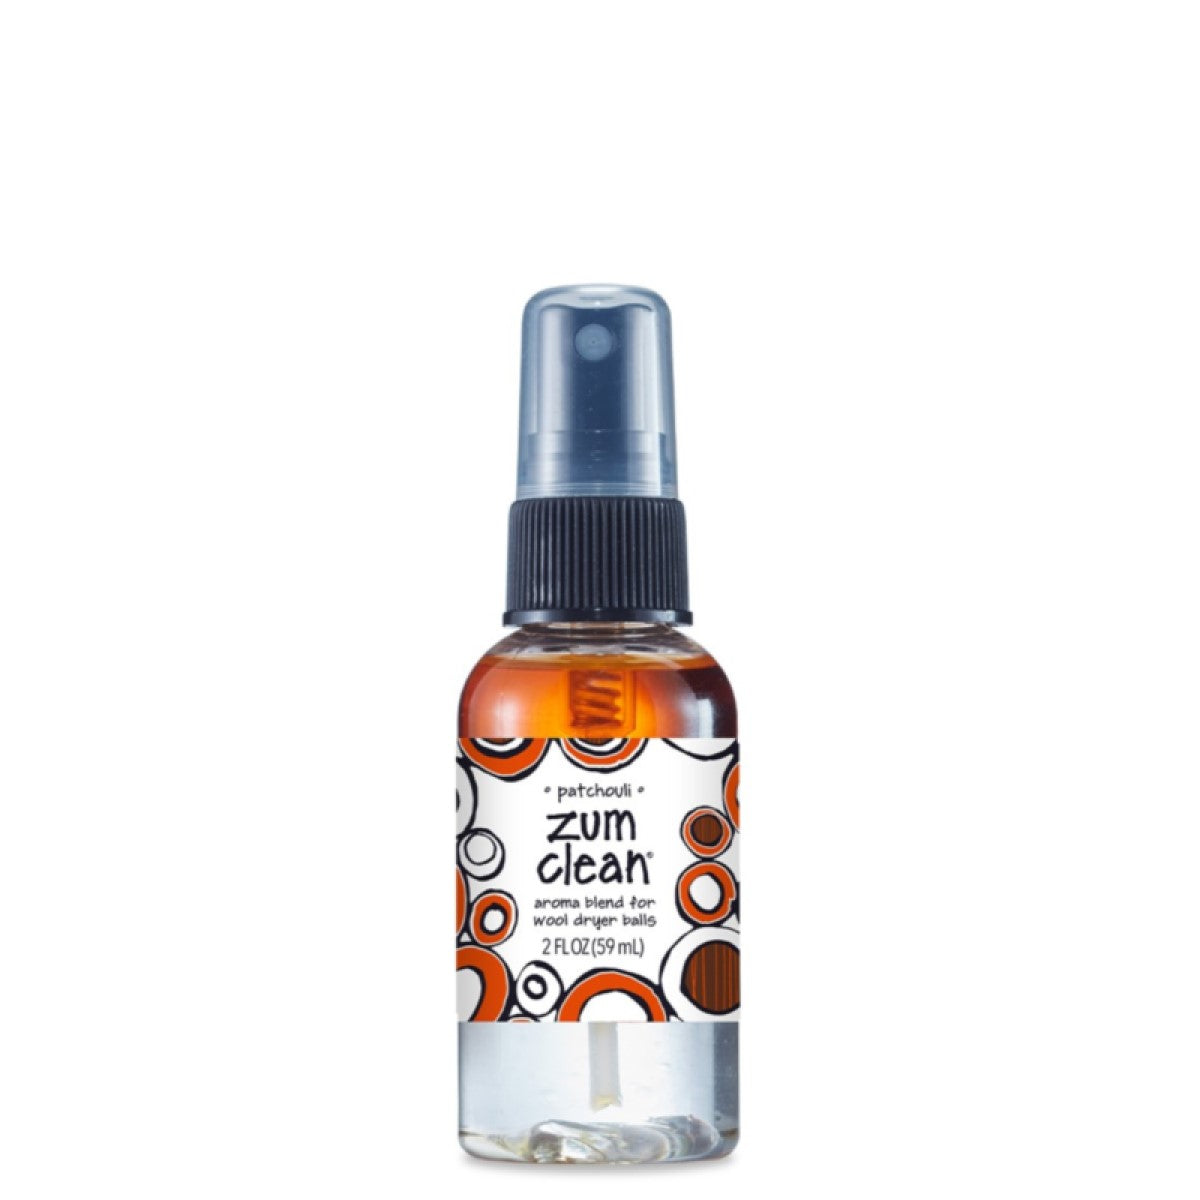 Primary Image of Wild Wool Ball Mist Aroma Blend